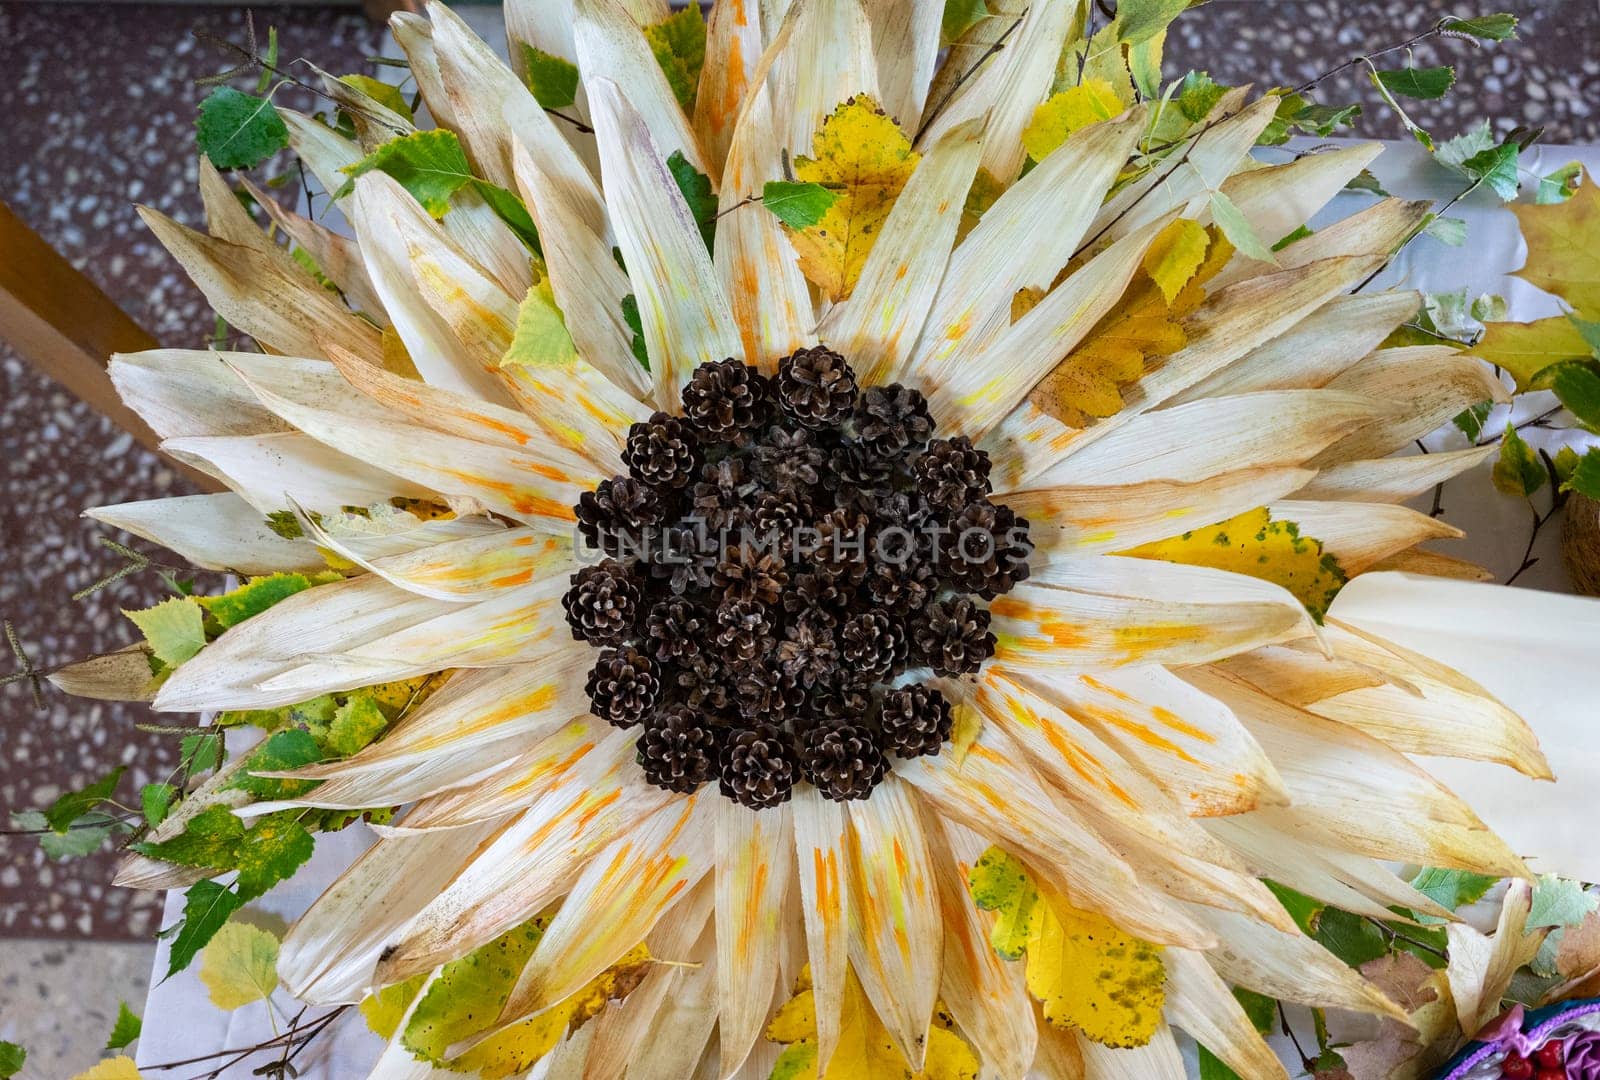 A large sunflower is made of corn cones and leaves by Serhii_Voroshchuk